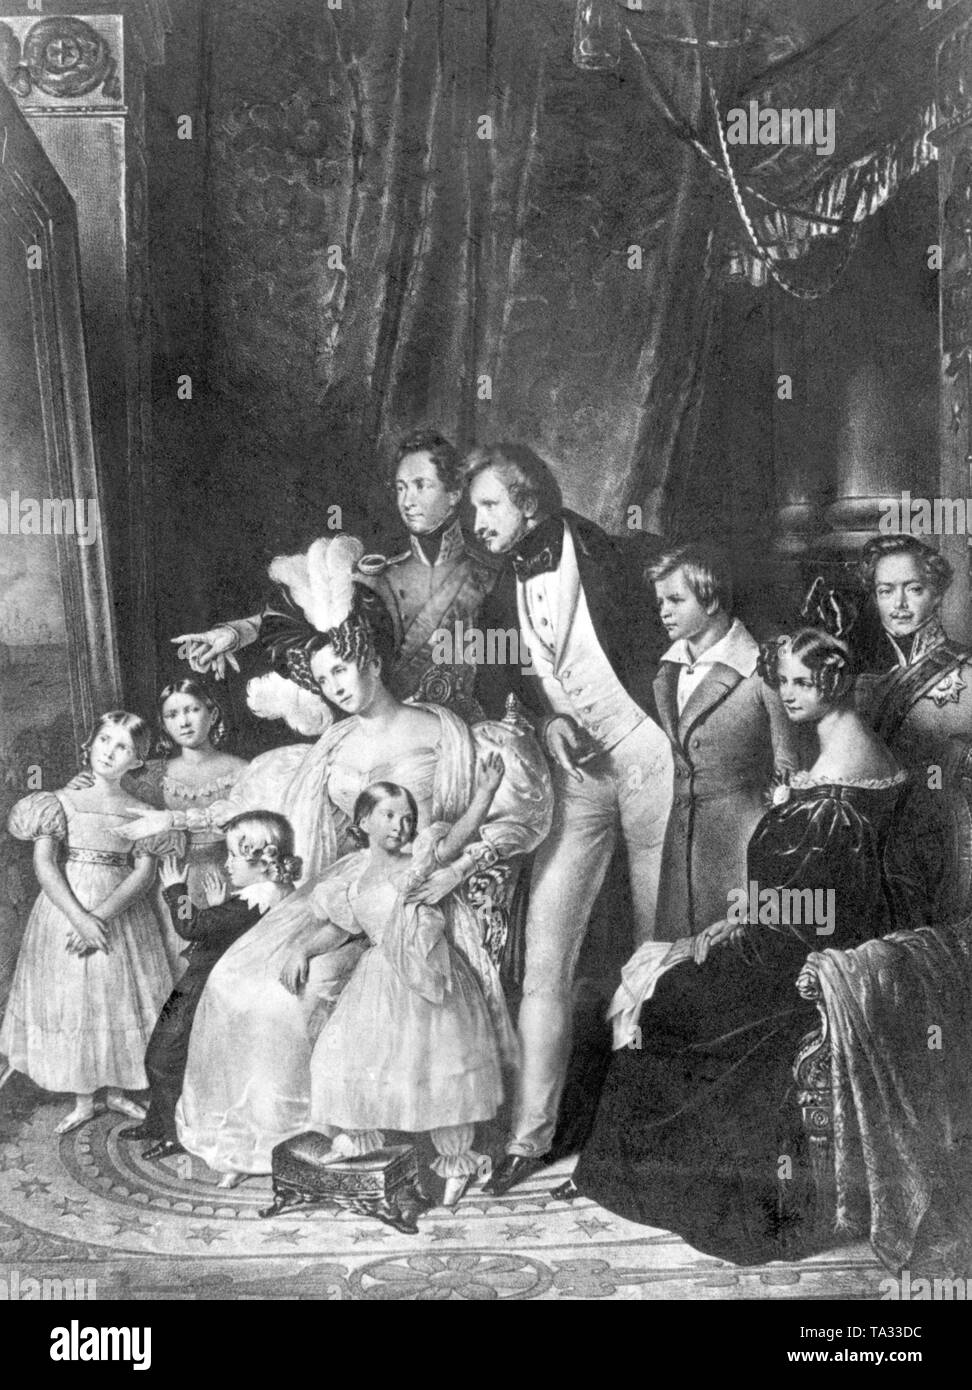 This painting shows King Ludwig I in the circle of his family: from left to right: Princess Adelgunde, Princess Hildegard, Prince Adalbert, Queen Theresa, Princess Alexandra, Crown Prince Max, King Ludwig I, Prince Luitpold, Grand Duchess Mathilde of Hesse, Grand Duke Ludwig of Hesse. Undated painting, probably from the 1830s. Stock Photo